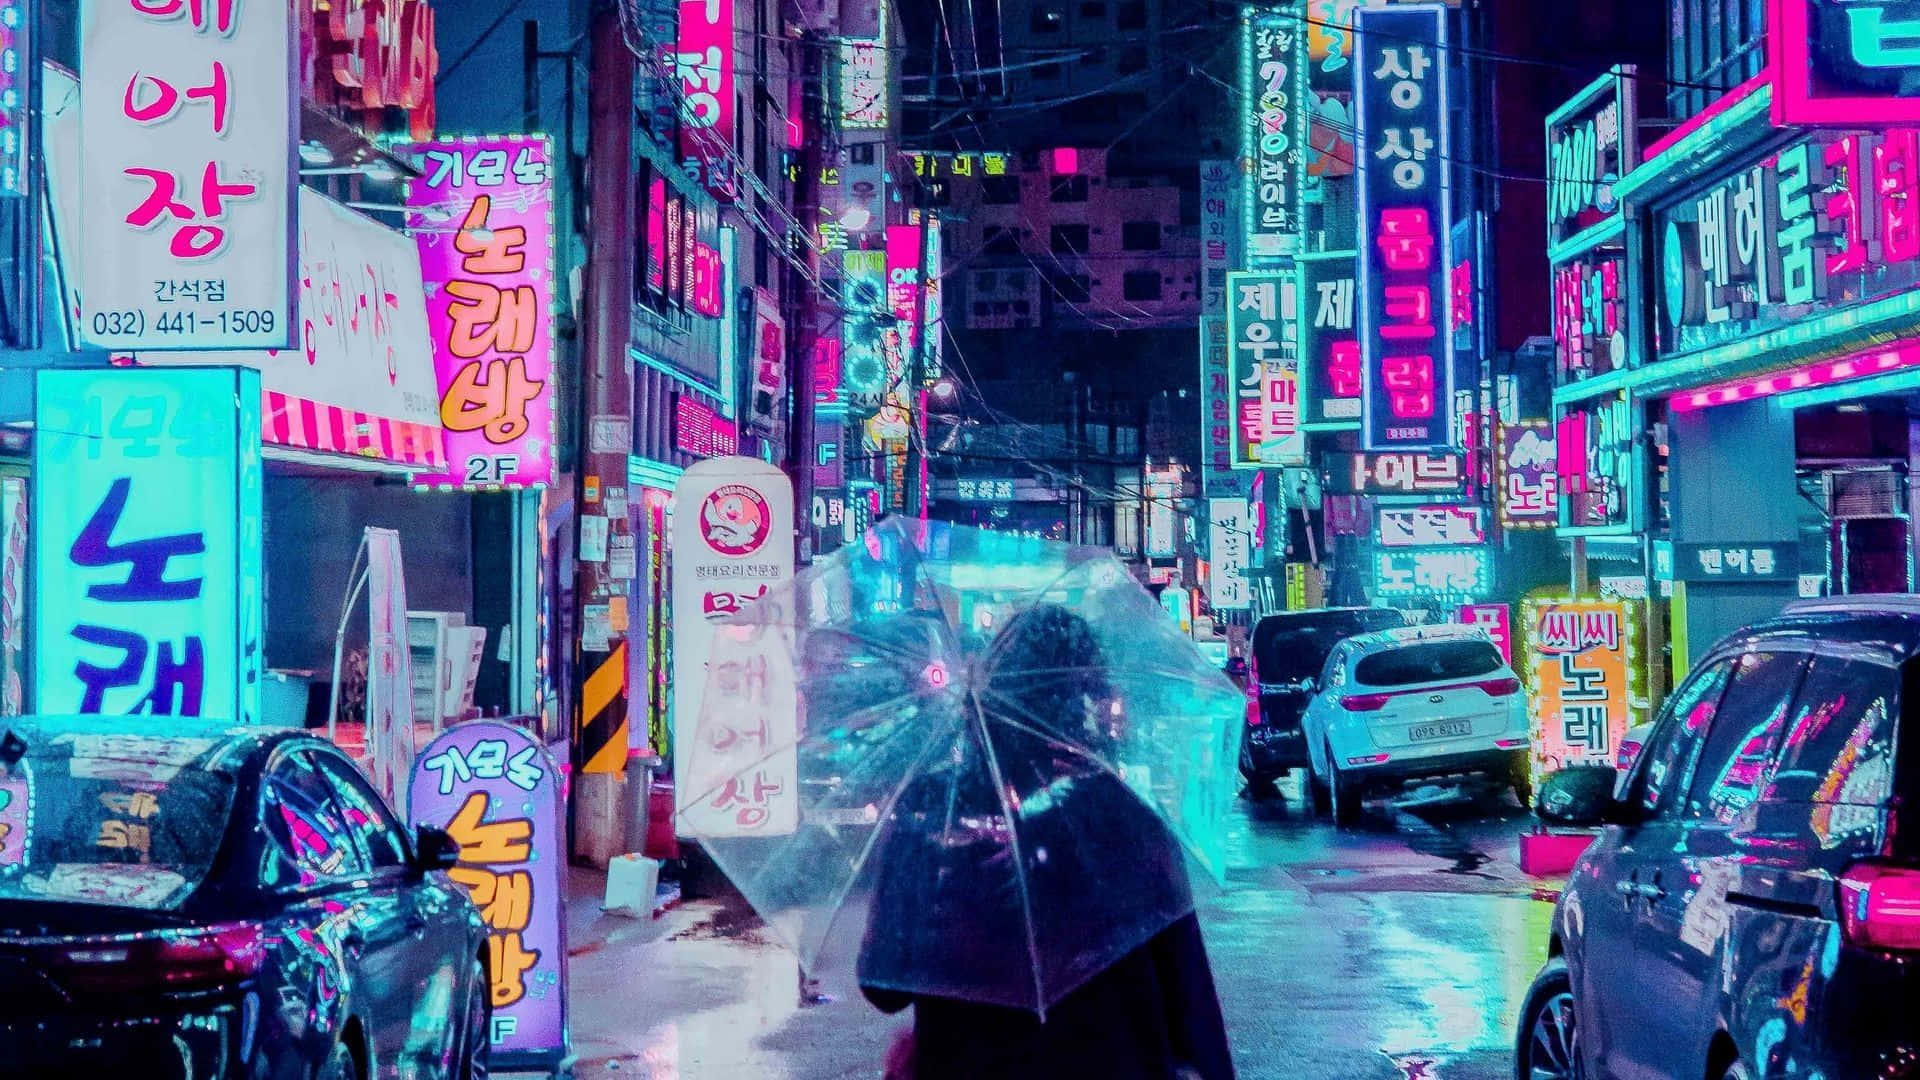 A woman walks down an alley with neon lights - Tokyo